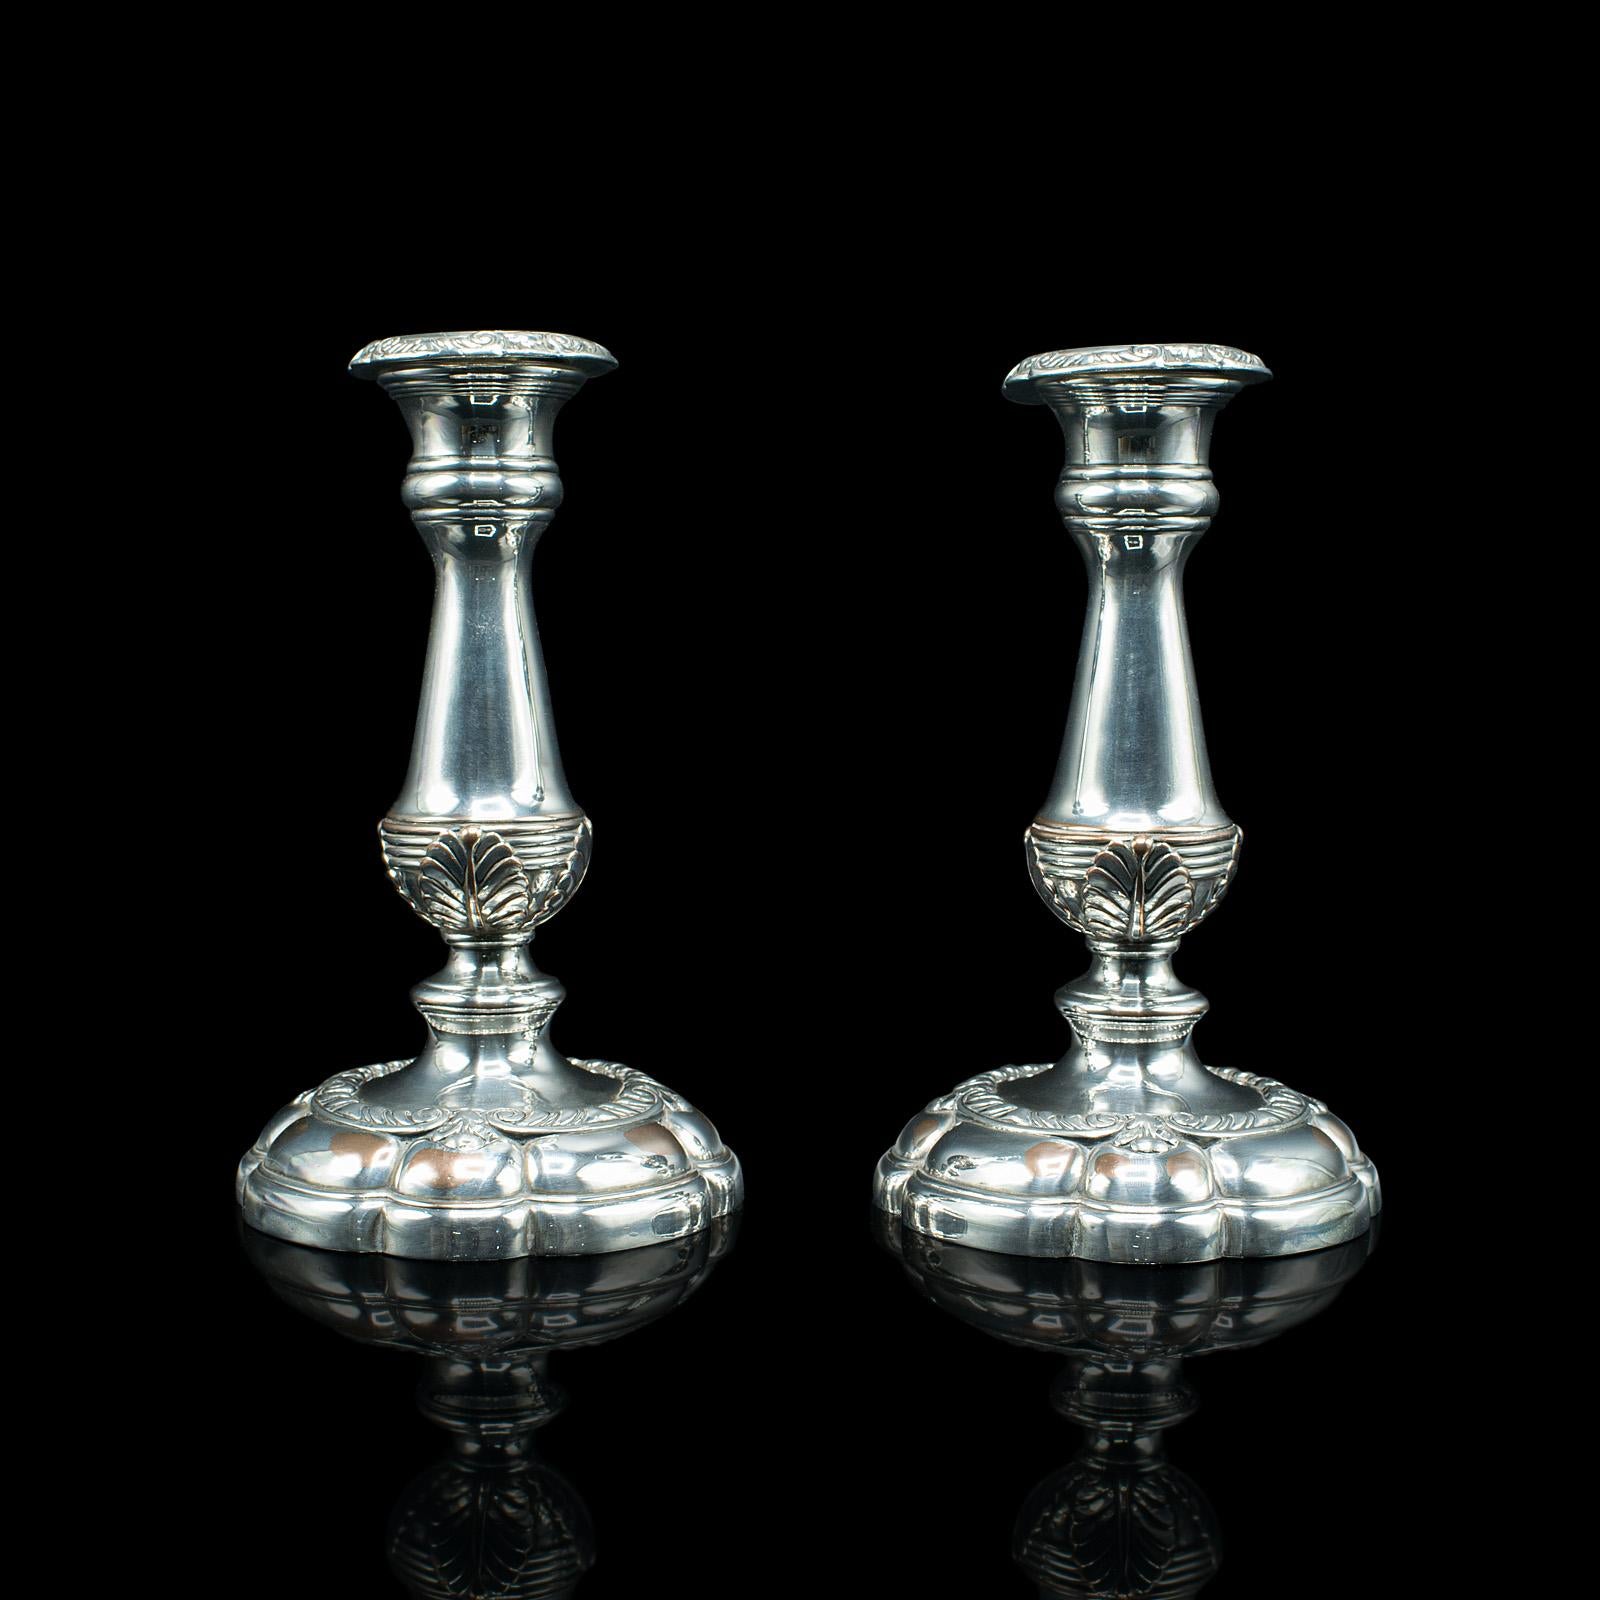 This is a pair of antique decorative candlesticks. An English, silver plated mantle or dinner table candle stand, dating to the Edwardian period, circa 1910.

Pleasingly decorative and brightly polished candlesticks
Displaying a desirable aged